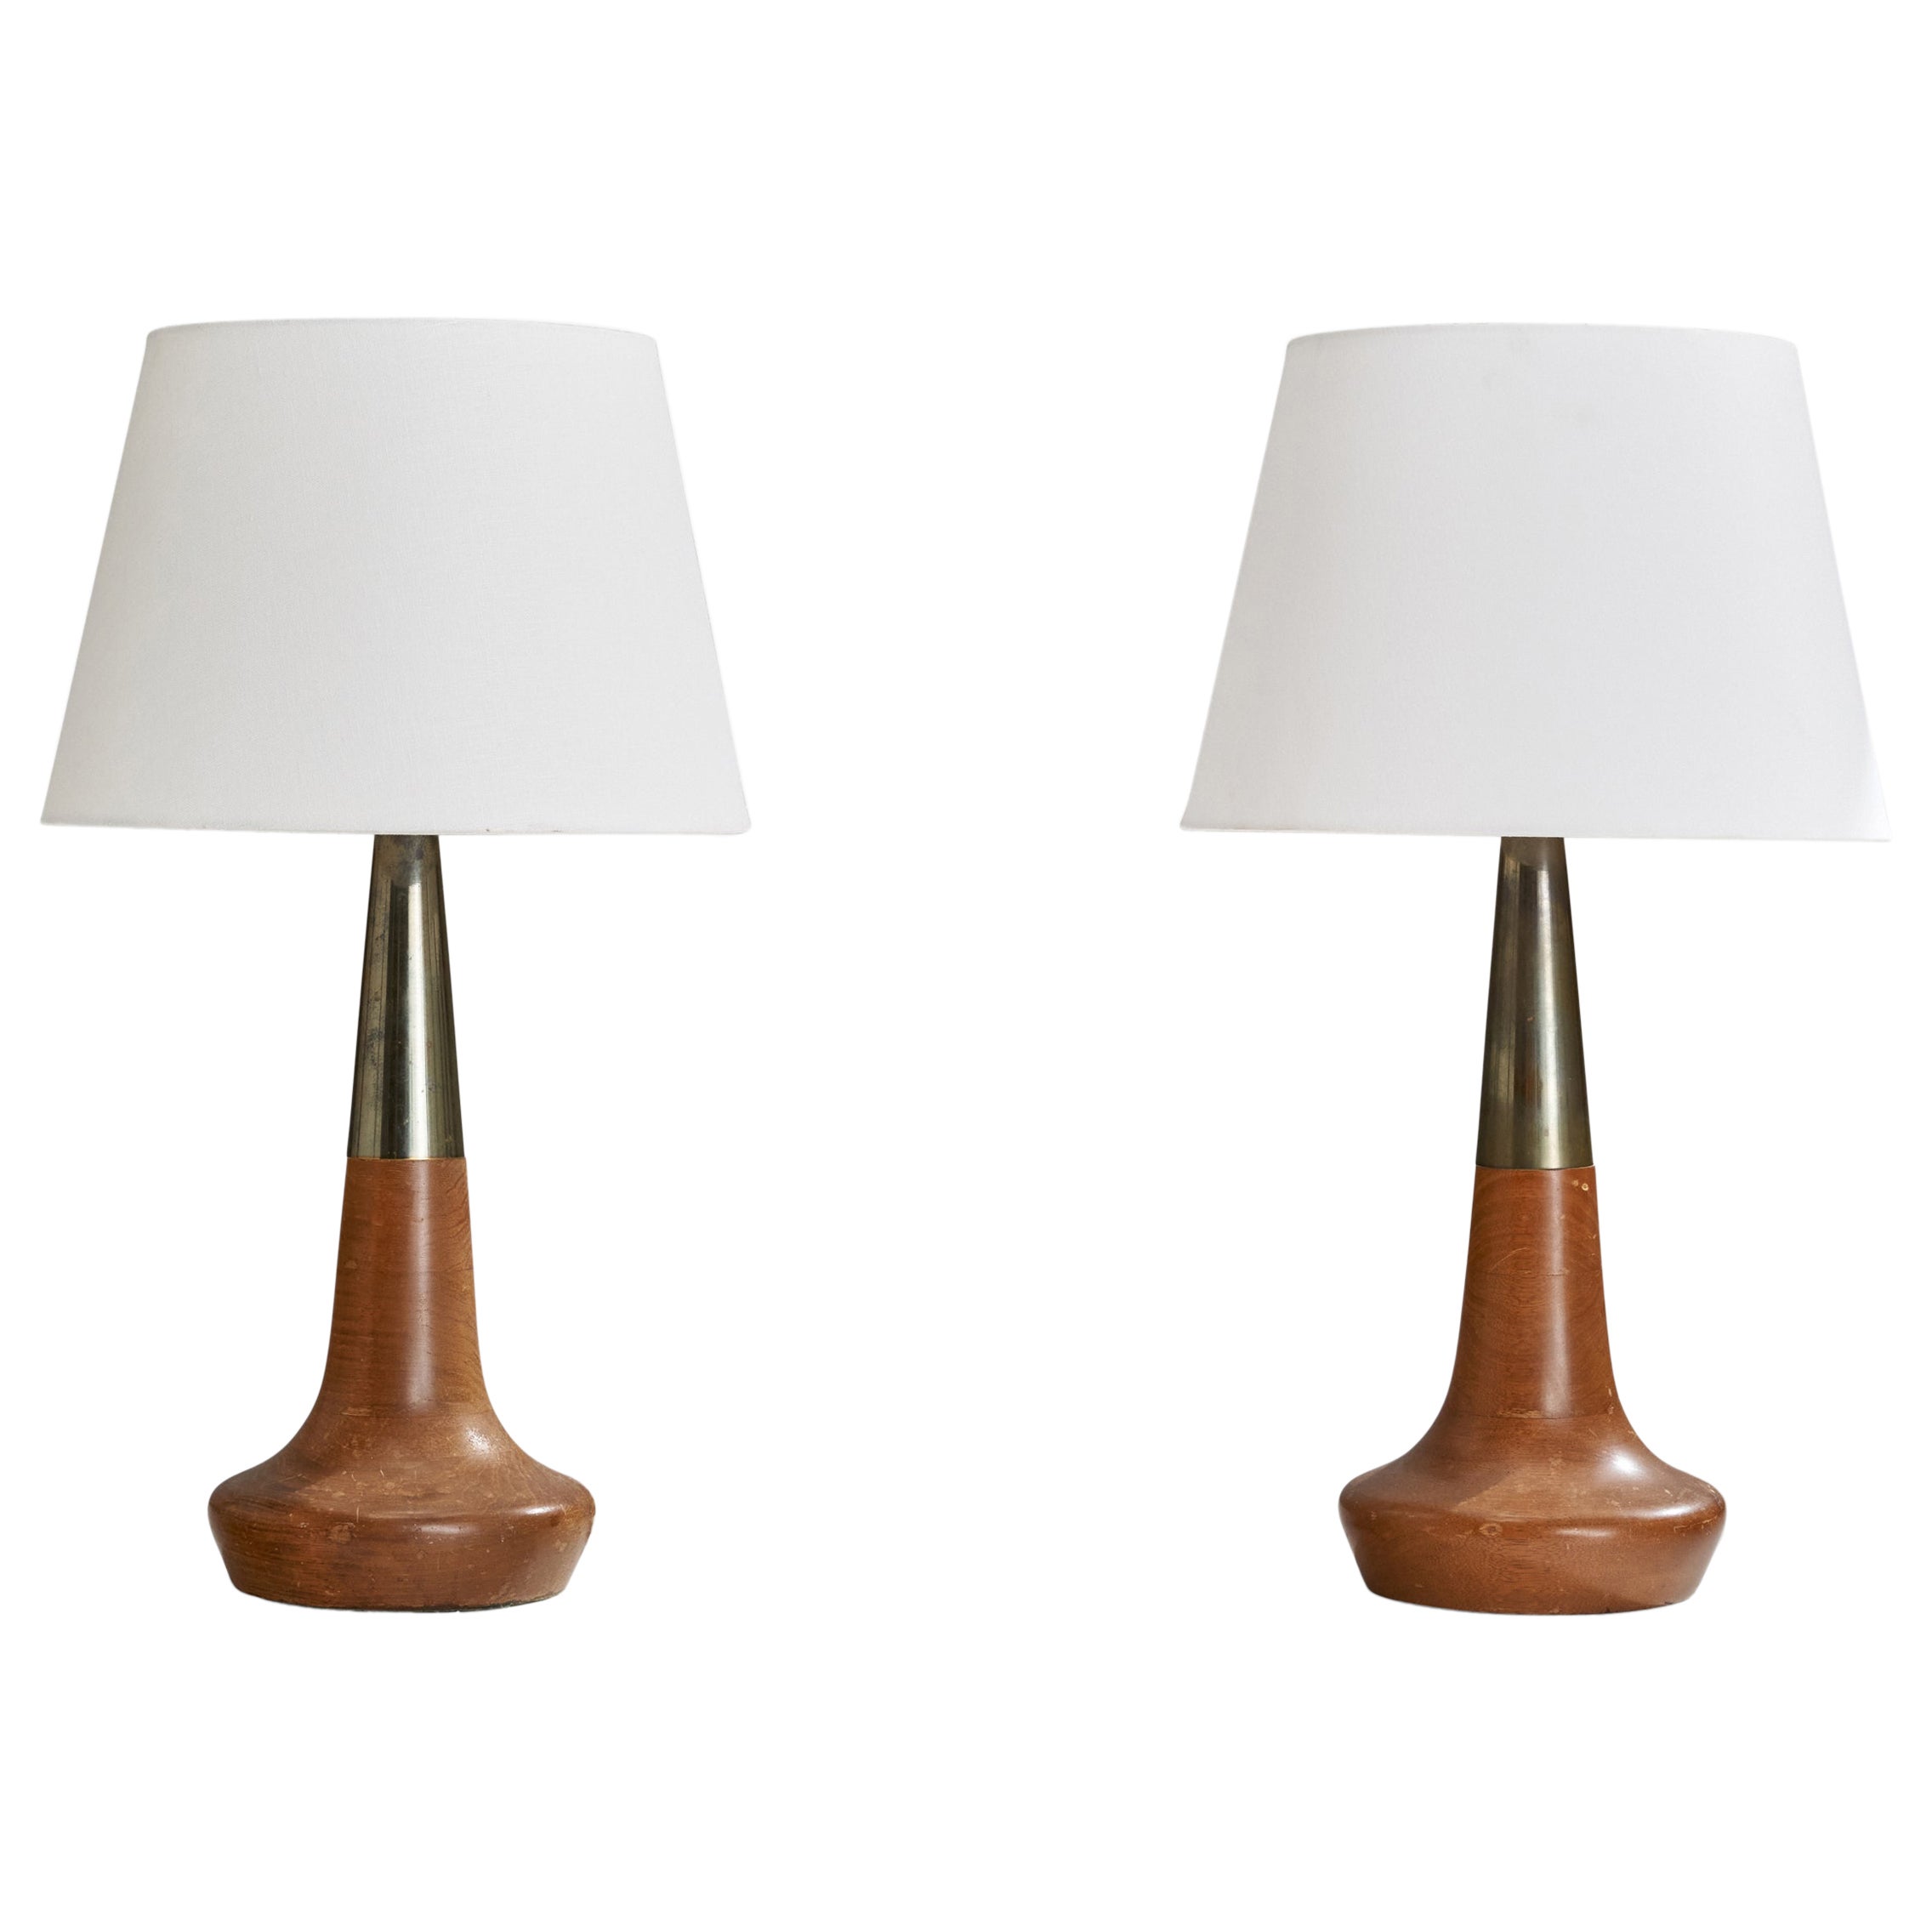 Tony Paul, Table Lamps, Walnut, Brass, USA, 1950s For Sale